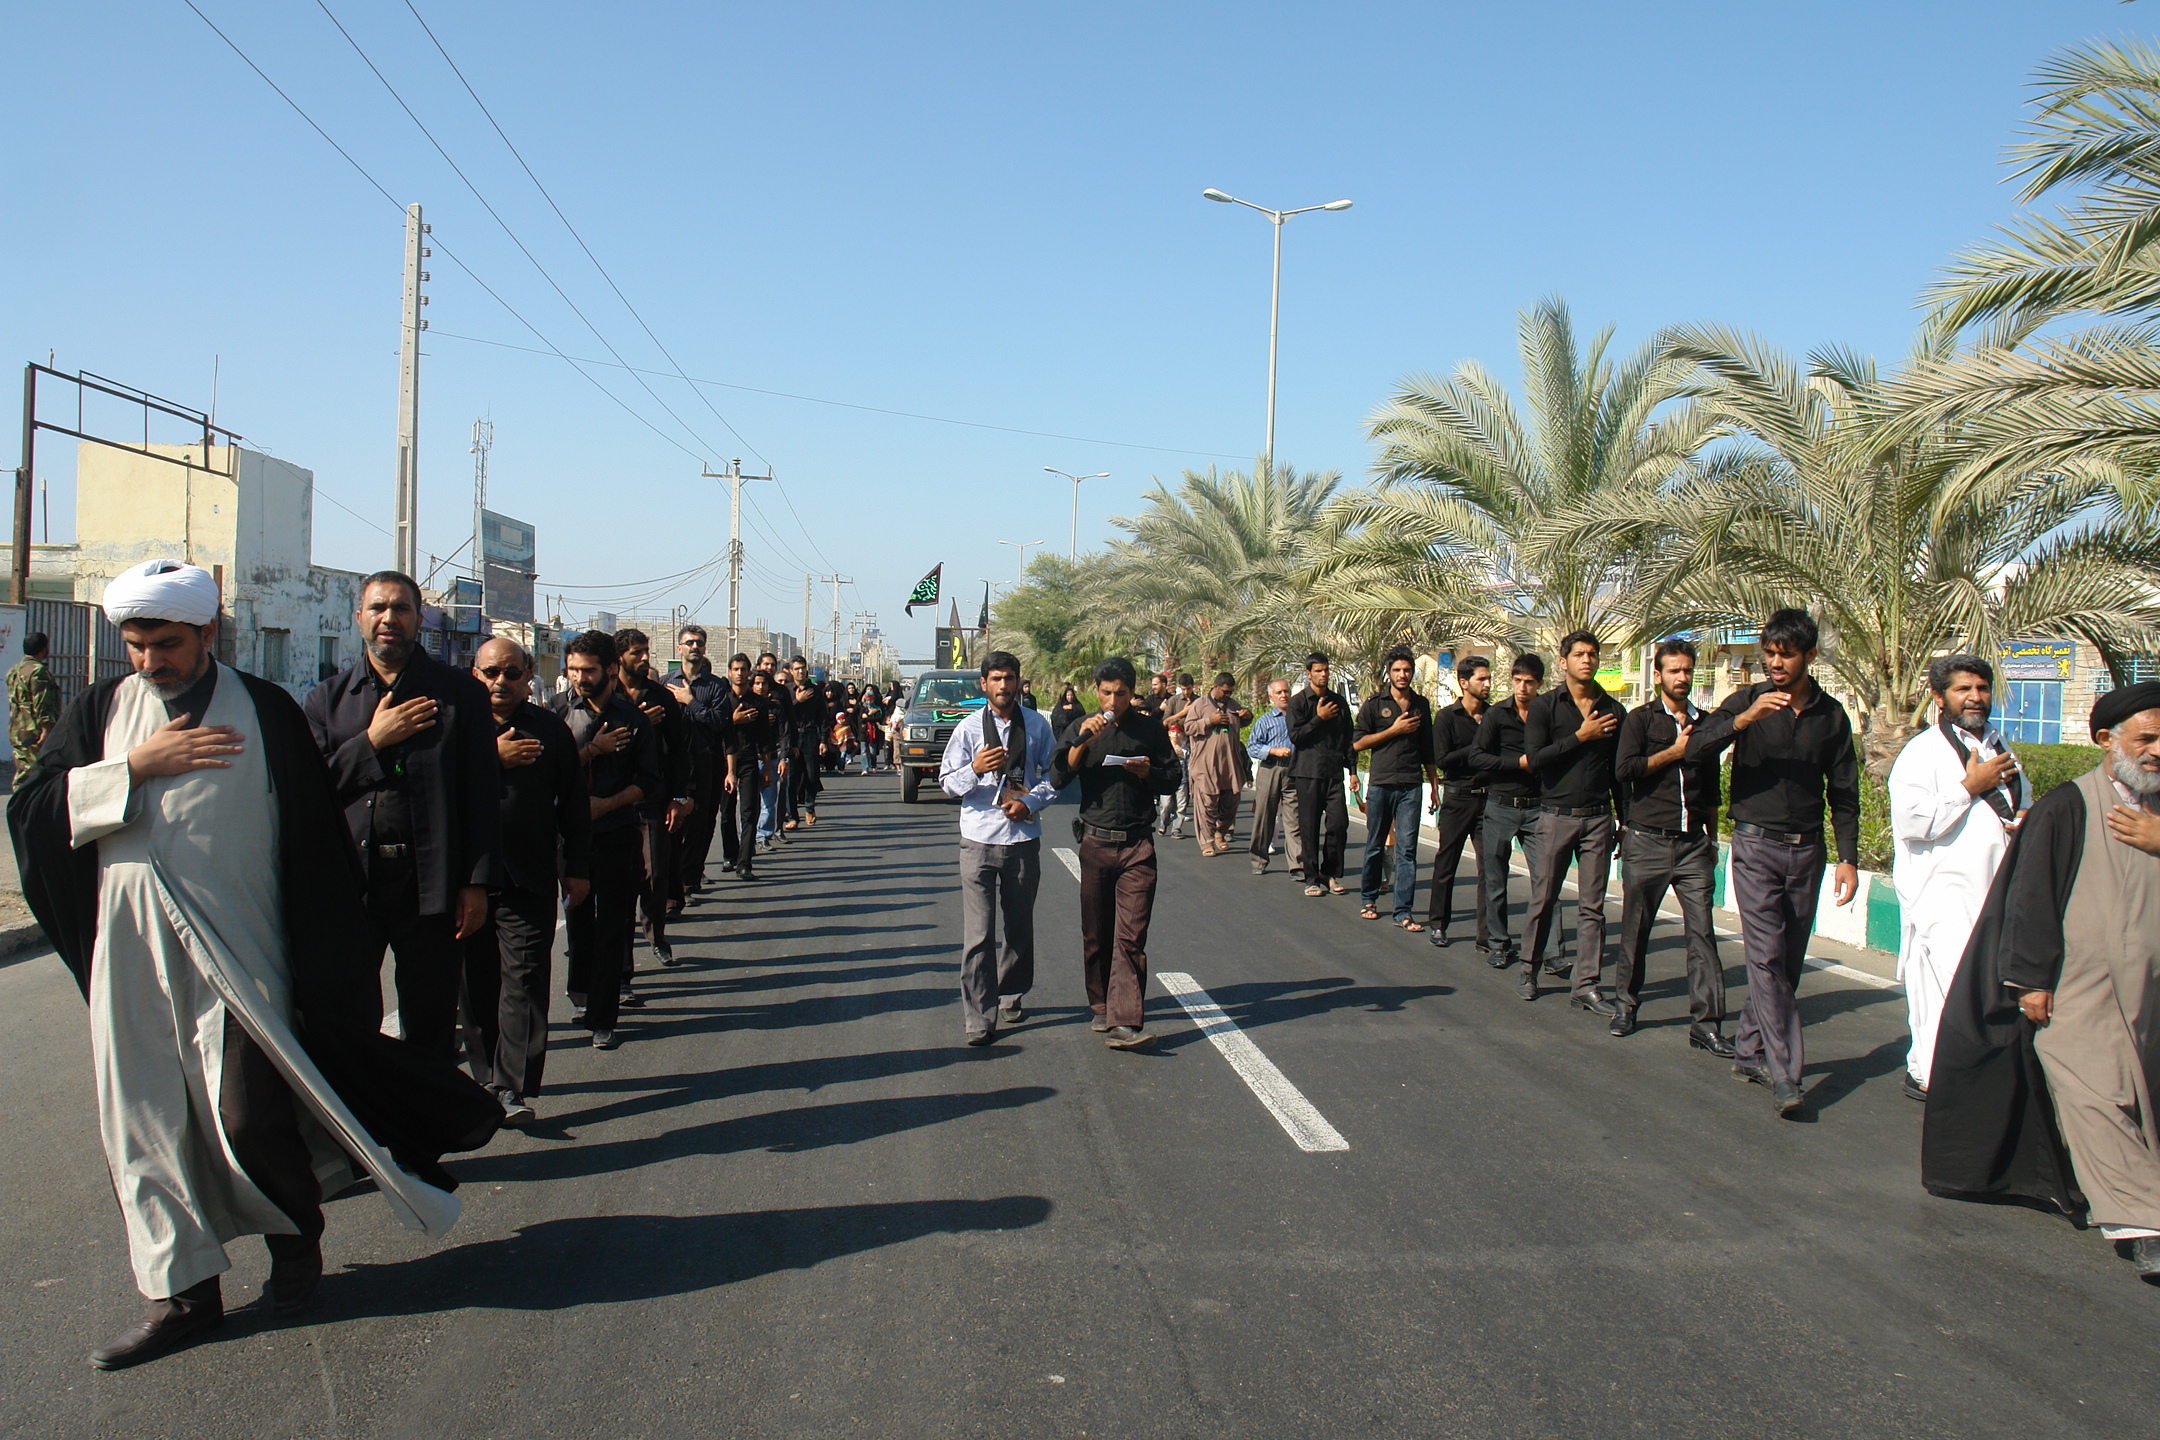 The mourning procession several minutes before the blast